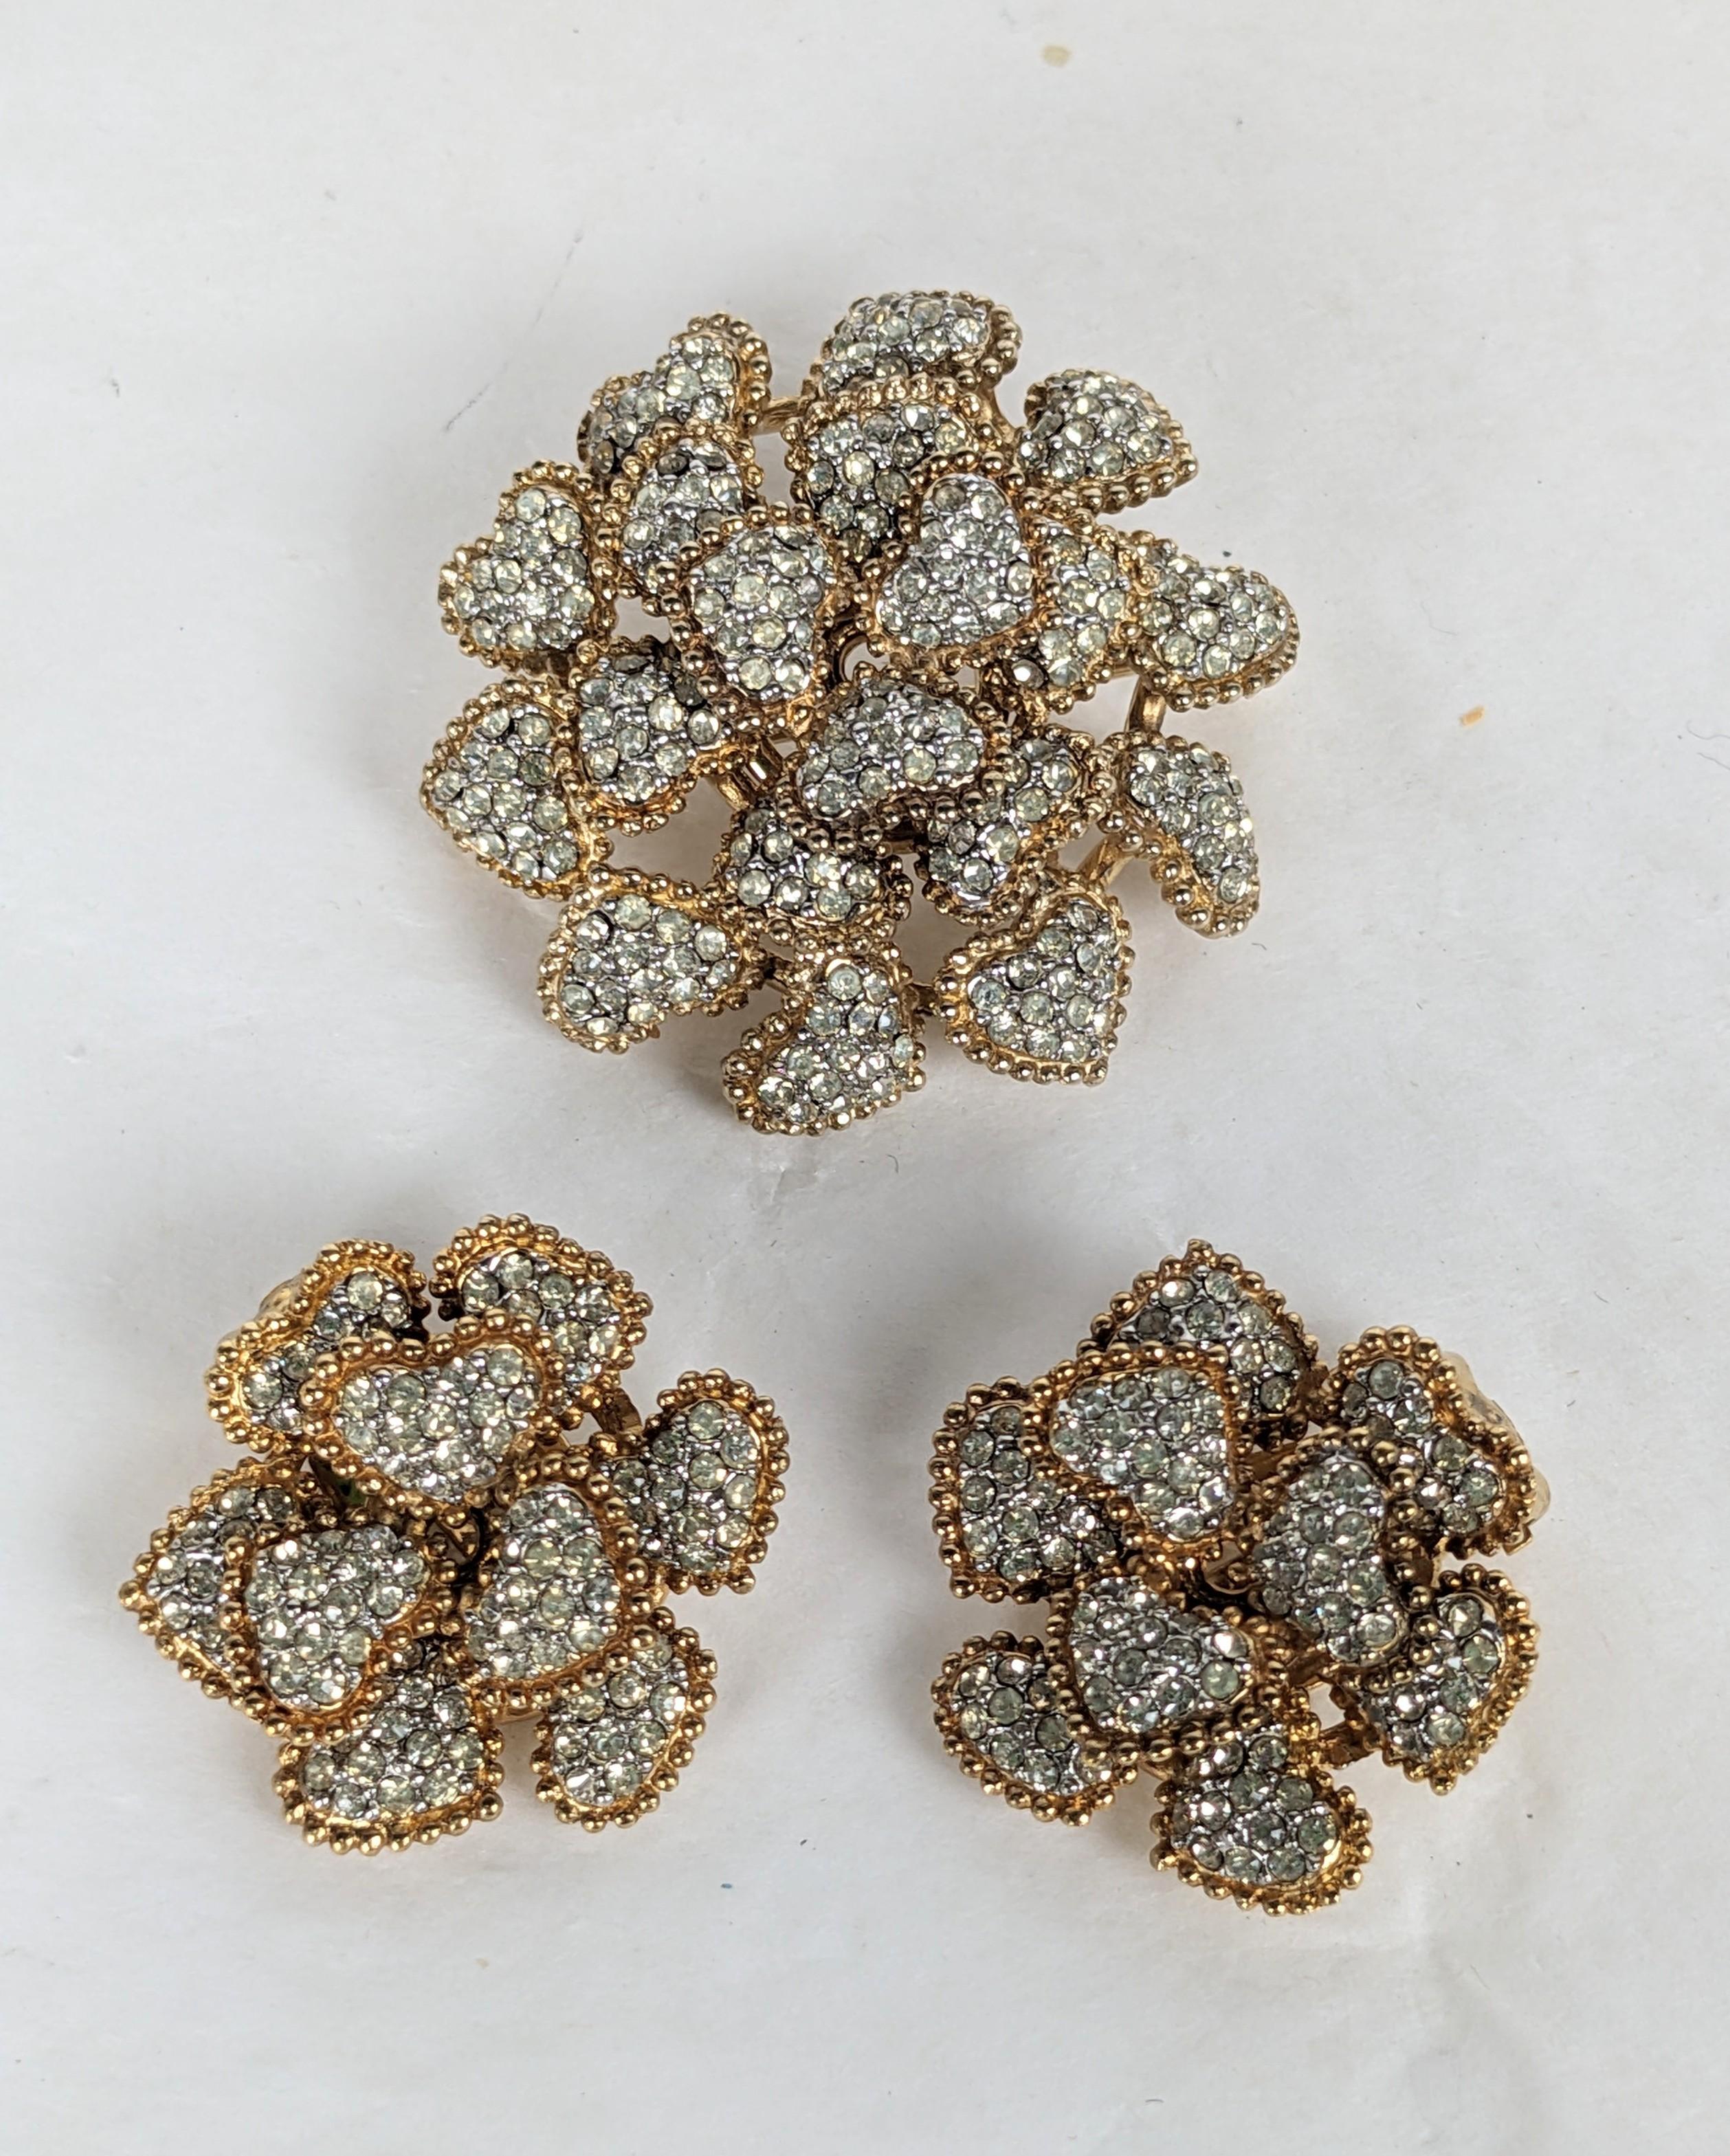 Elegant Ciner Pave and Gilt Flower Brooch Suite from the 1960's. Tiny heart shaped petals are hand pave set with crystals in gilt mounts. Brooch and clip back earrings. Signed. 1960's USA. 
Brooch 1.5